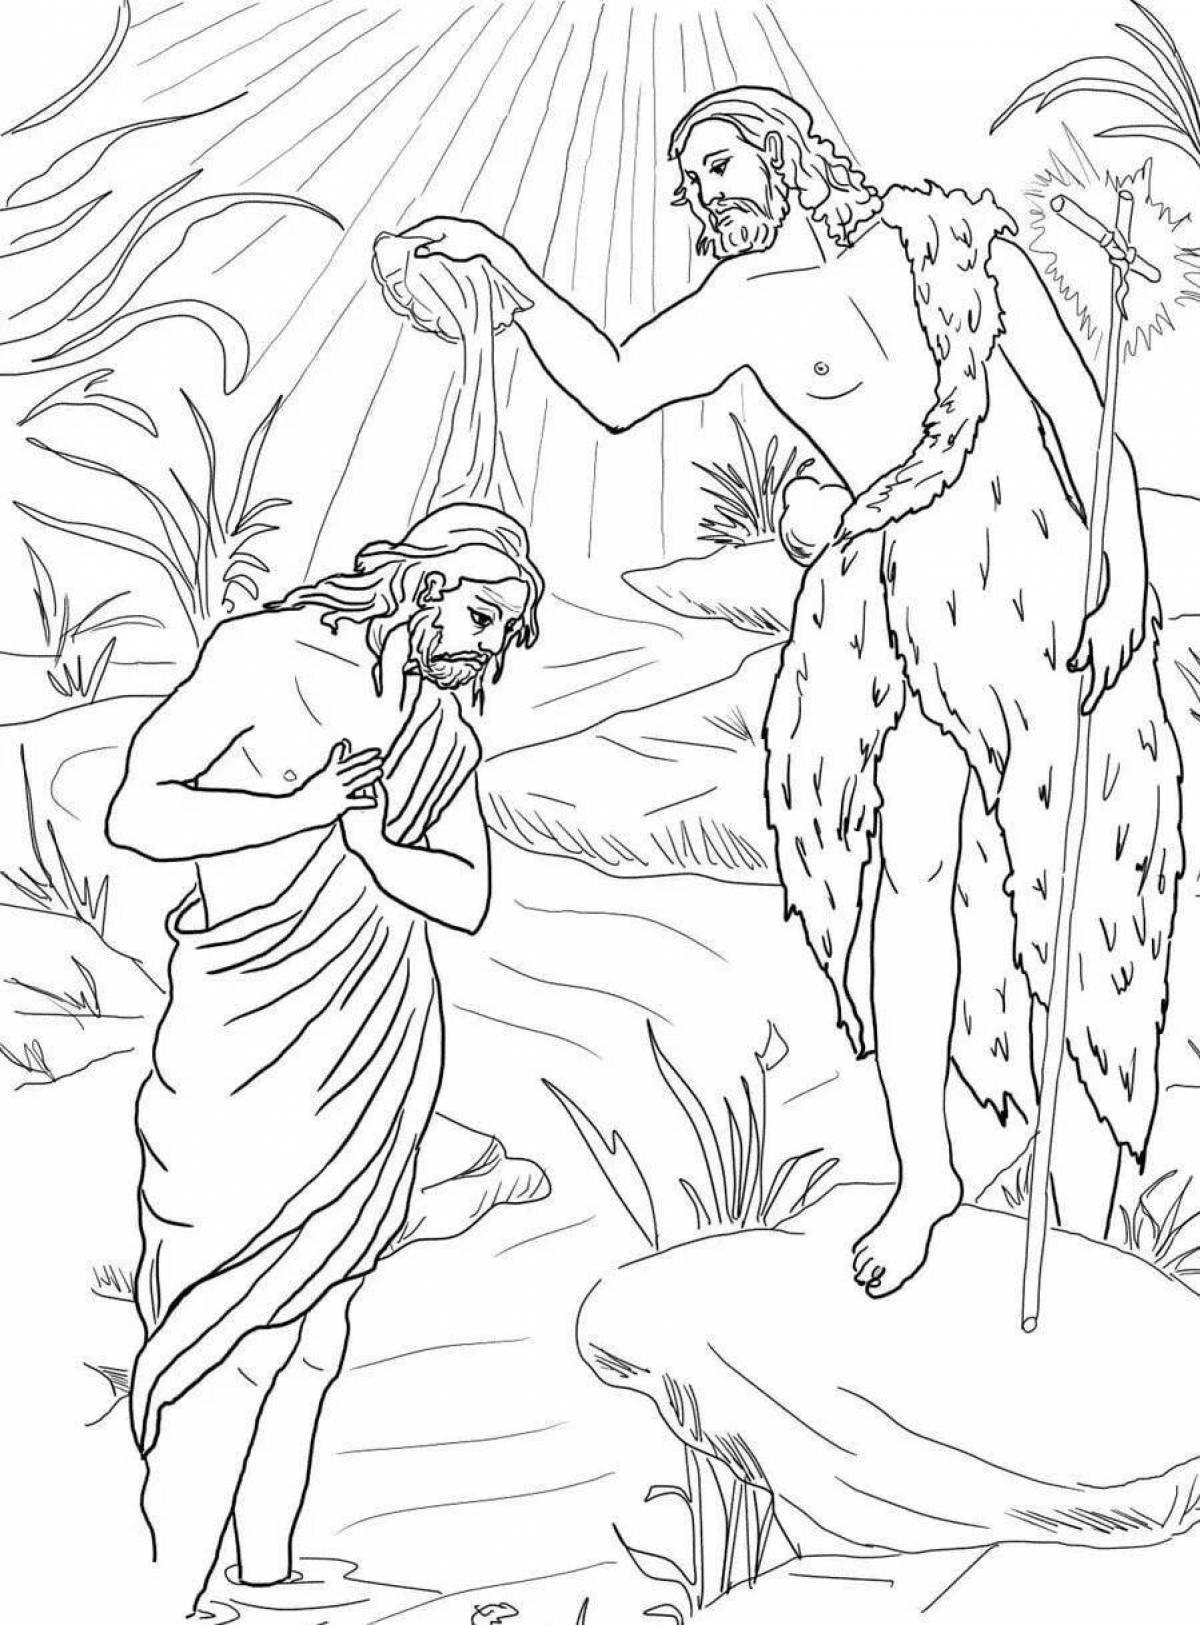 About the baptism of the Lord #1